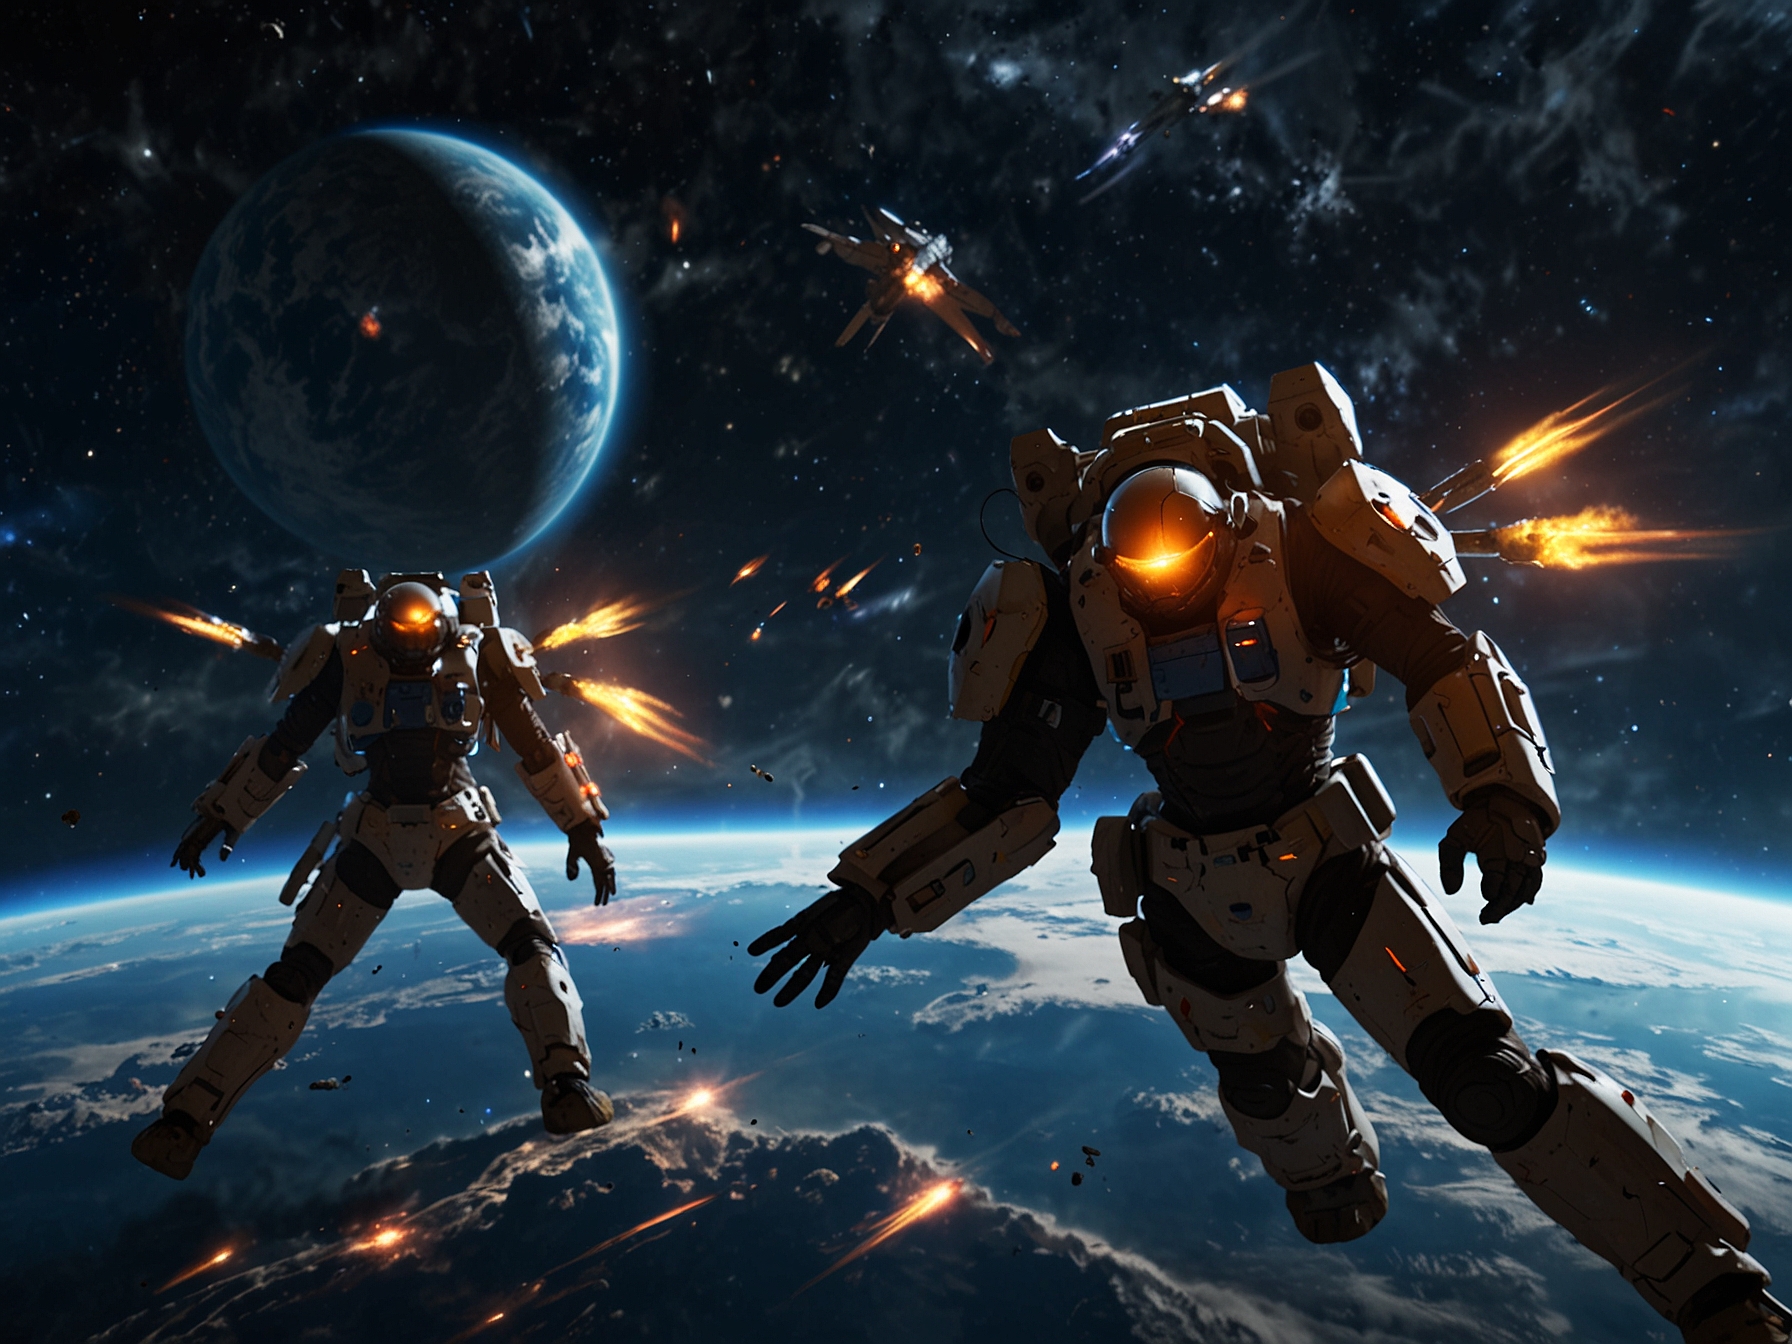 An in-game screenshot showcasing Boundary's zero-gravity combat environment, with players navigating through space and engaging in dynamic, strategic firefights.